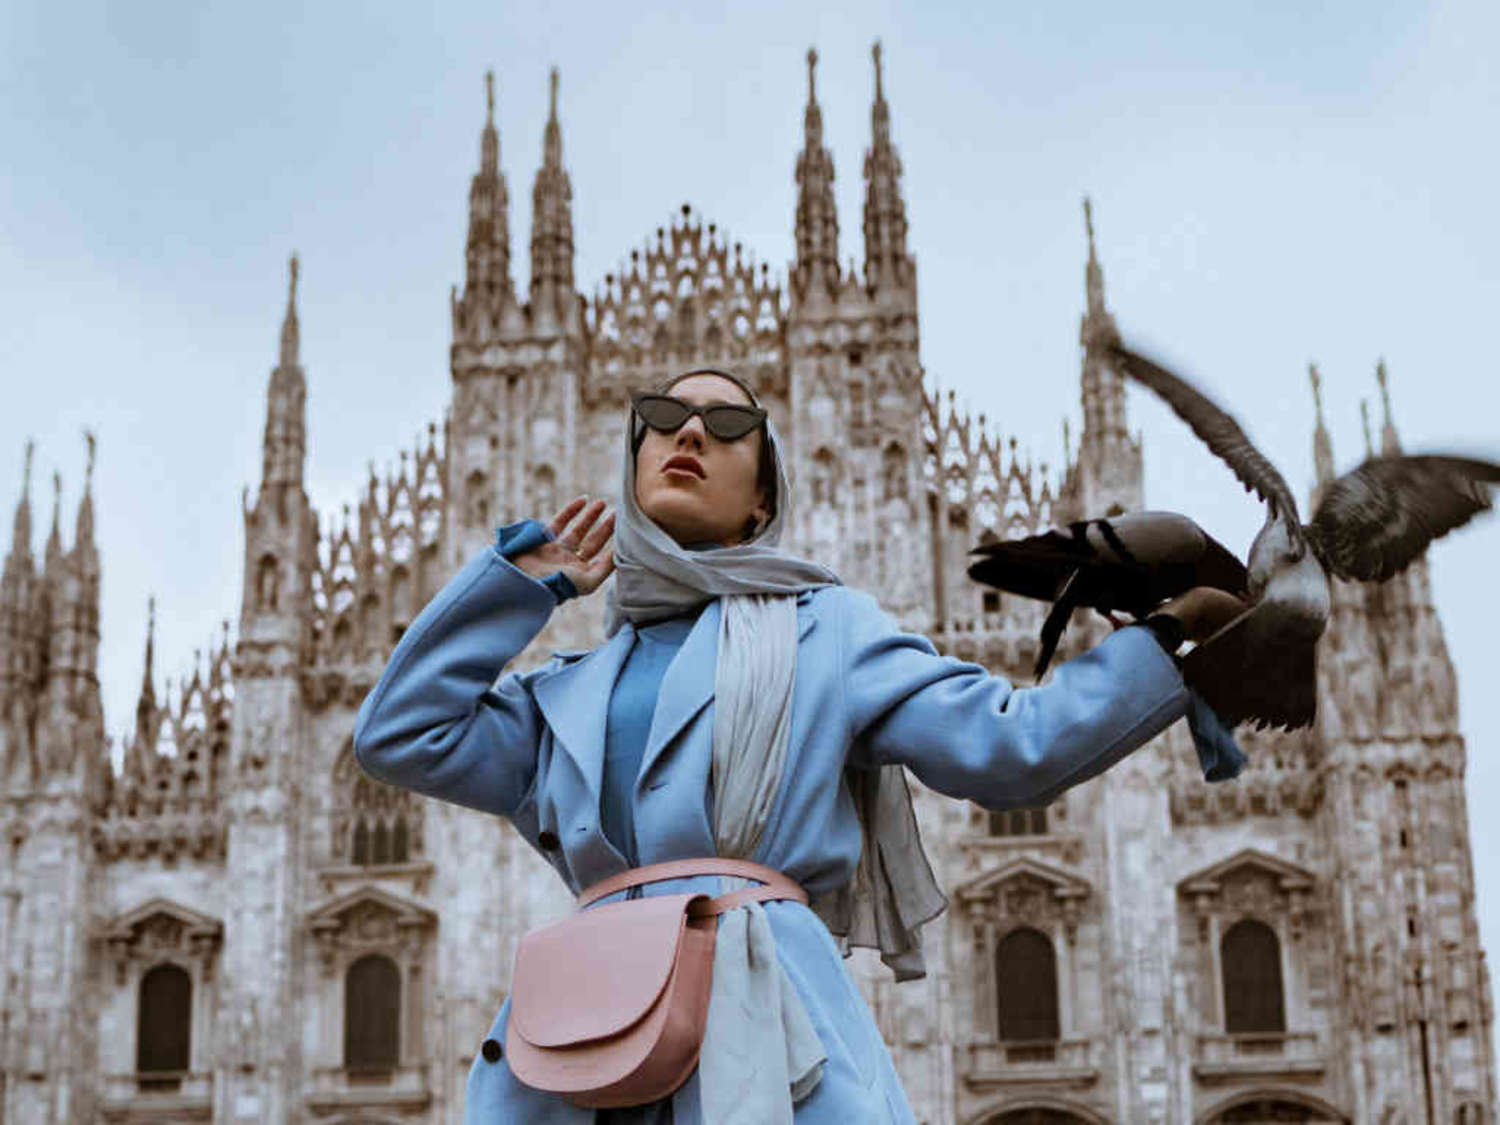 Italian fashion: from the Renaissance to modern days